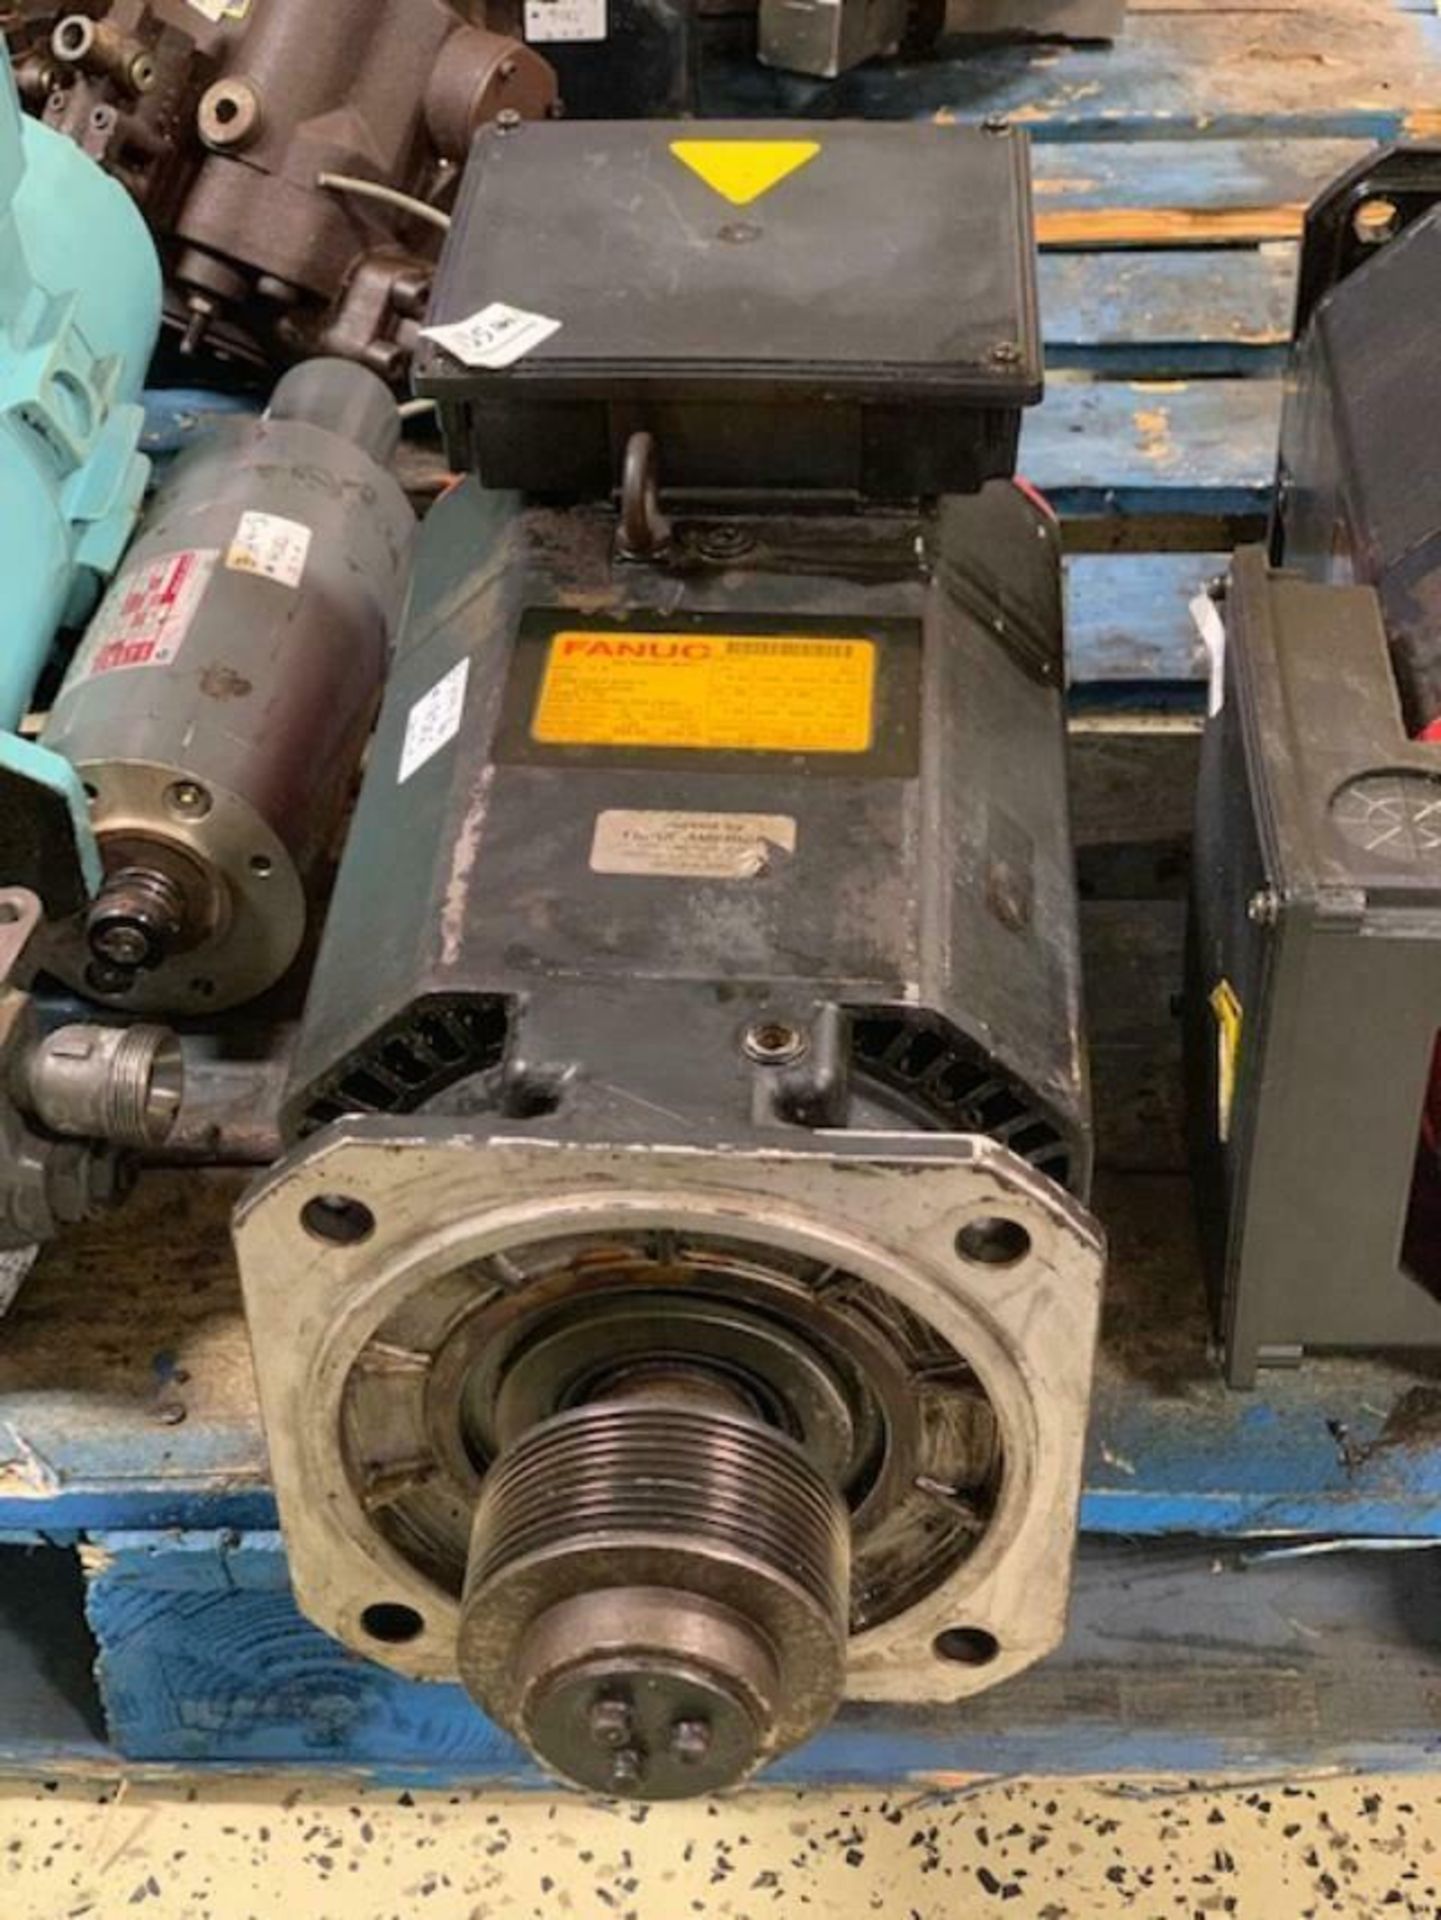 Fanuc #A06B-0854-B100-R Spindle Motor - Image 3 of 6